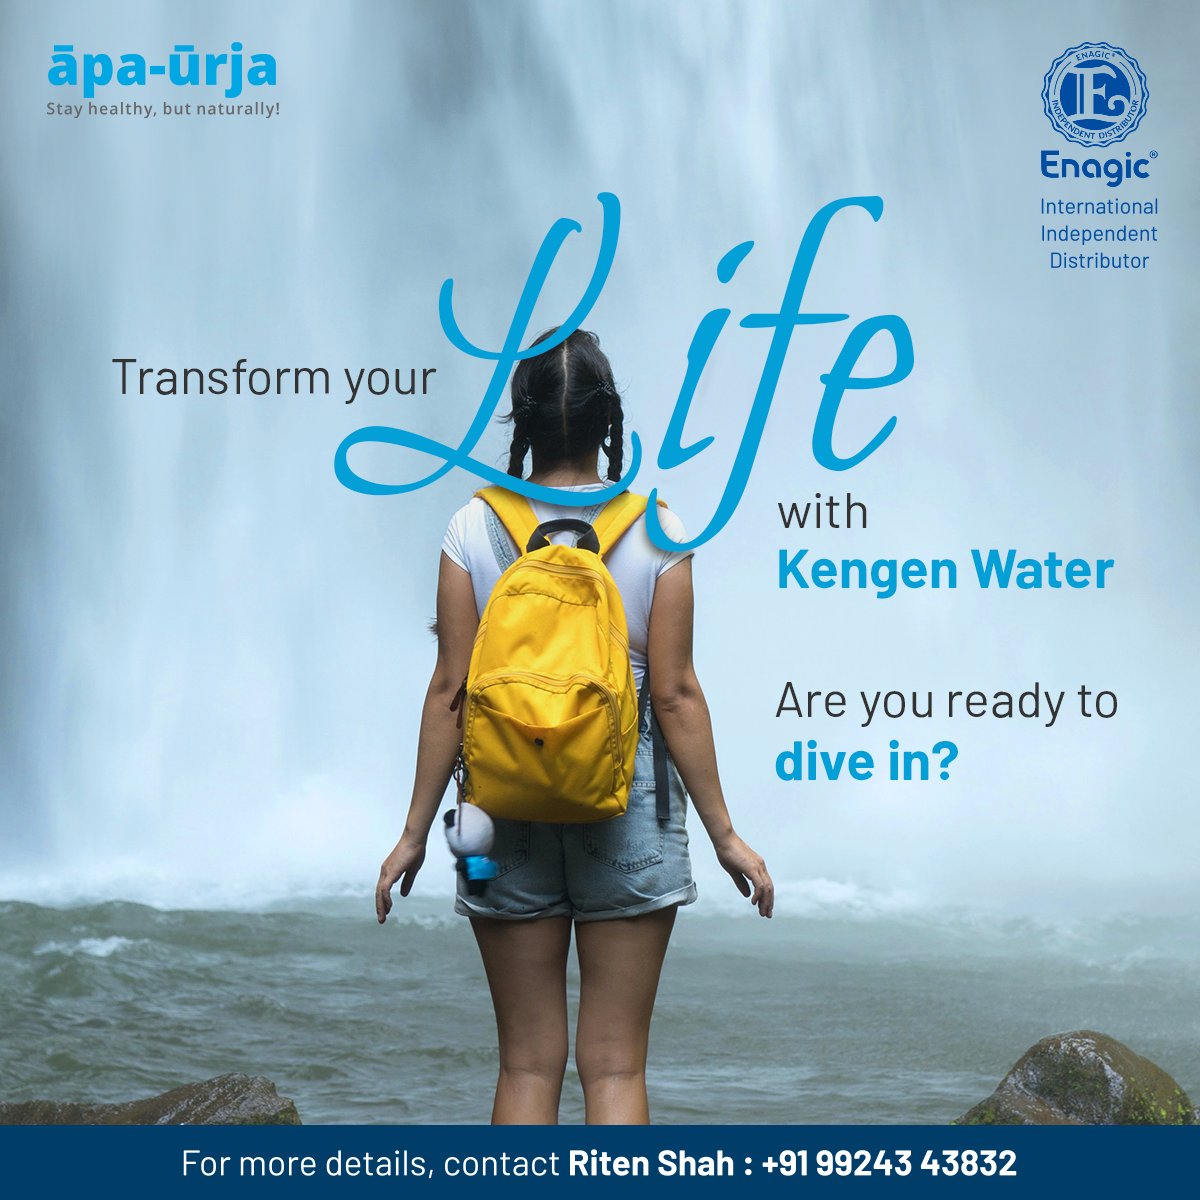 Kangen alkaline ionized water has healing properties that can change your 
health and transform your life.
.
.
.
#alkanlineionizedwater #naturalantioxidant #purestwater #hydrogenrichwater #waterpurification #purewater #freshwater #healthylife #kangenwater